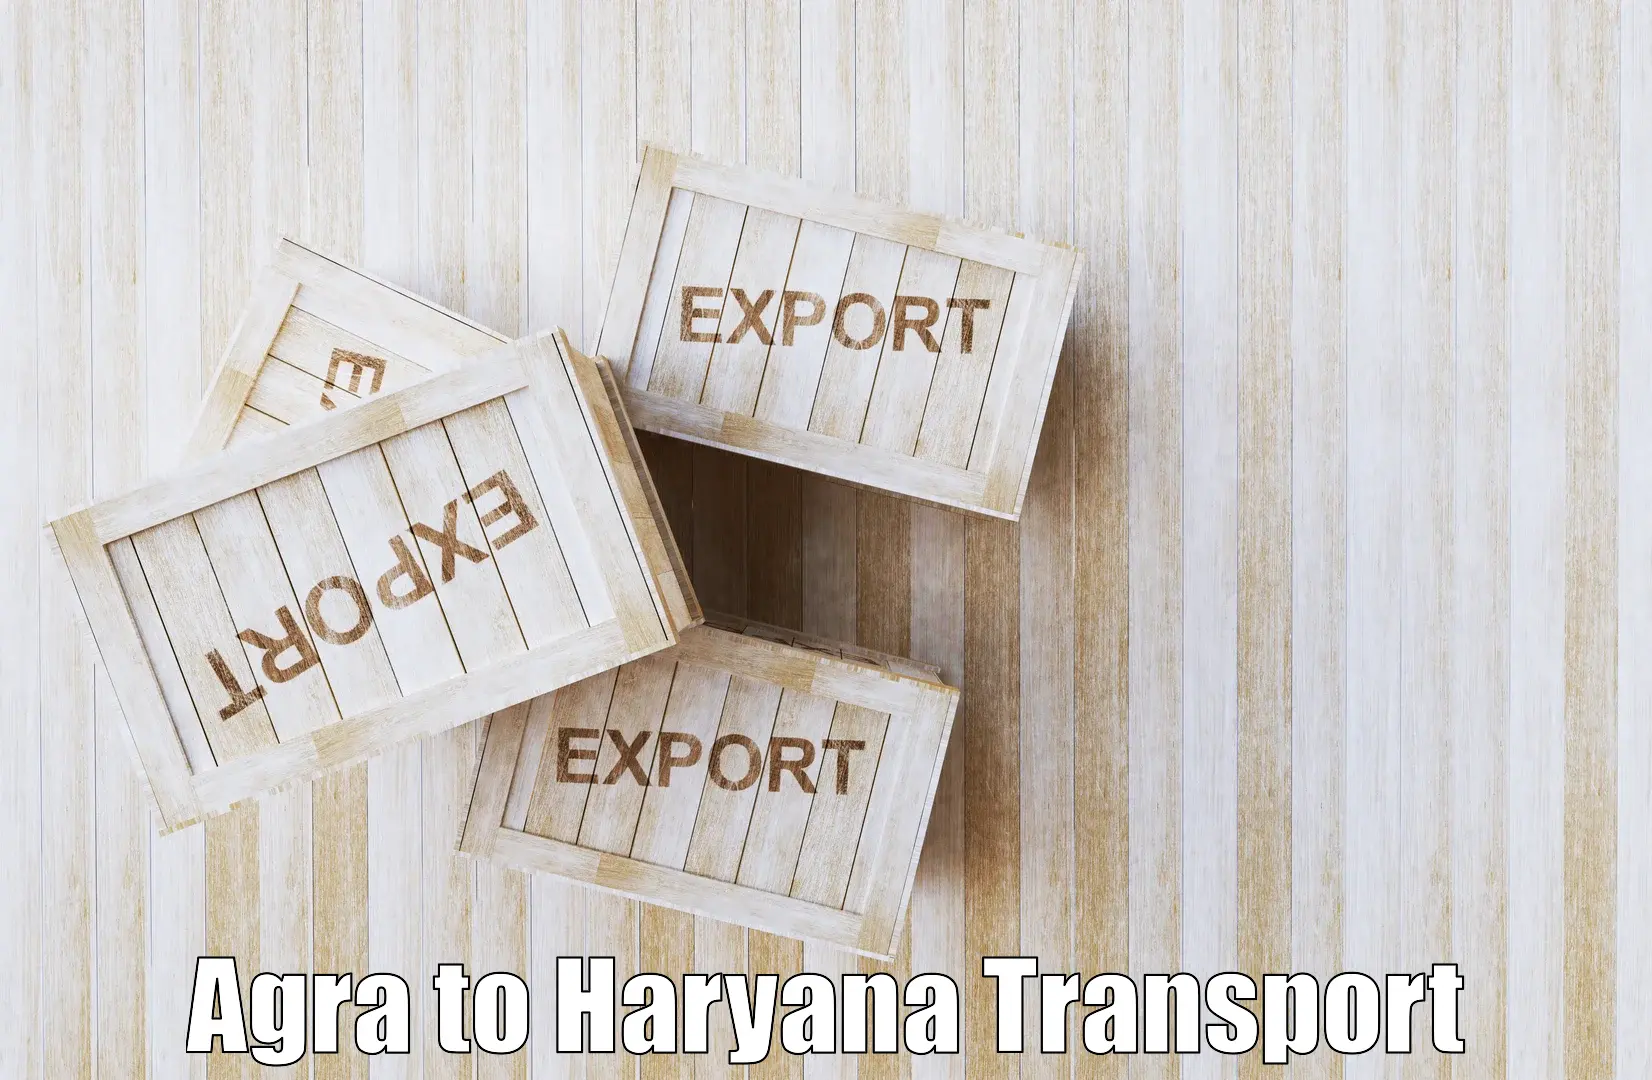 Nearby transport service Agra to Hansi